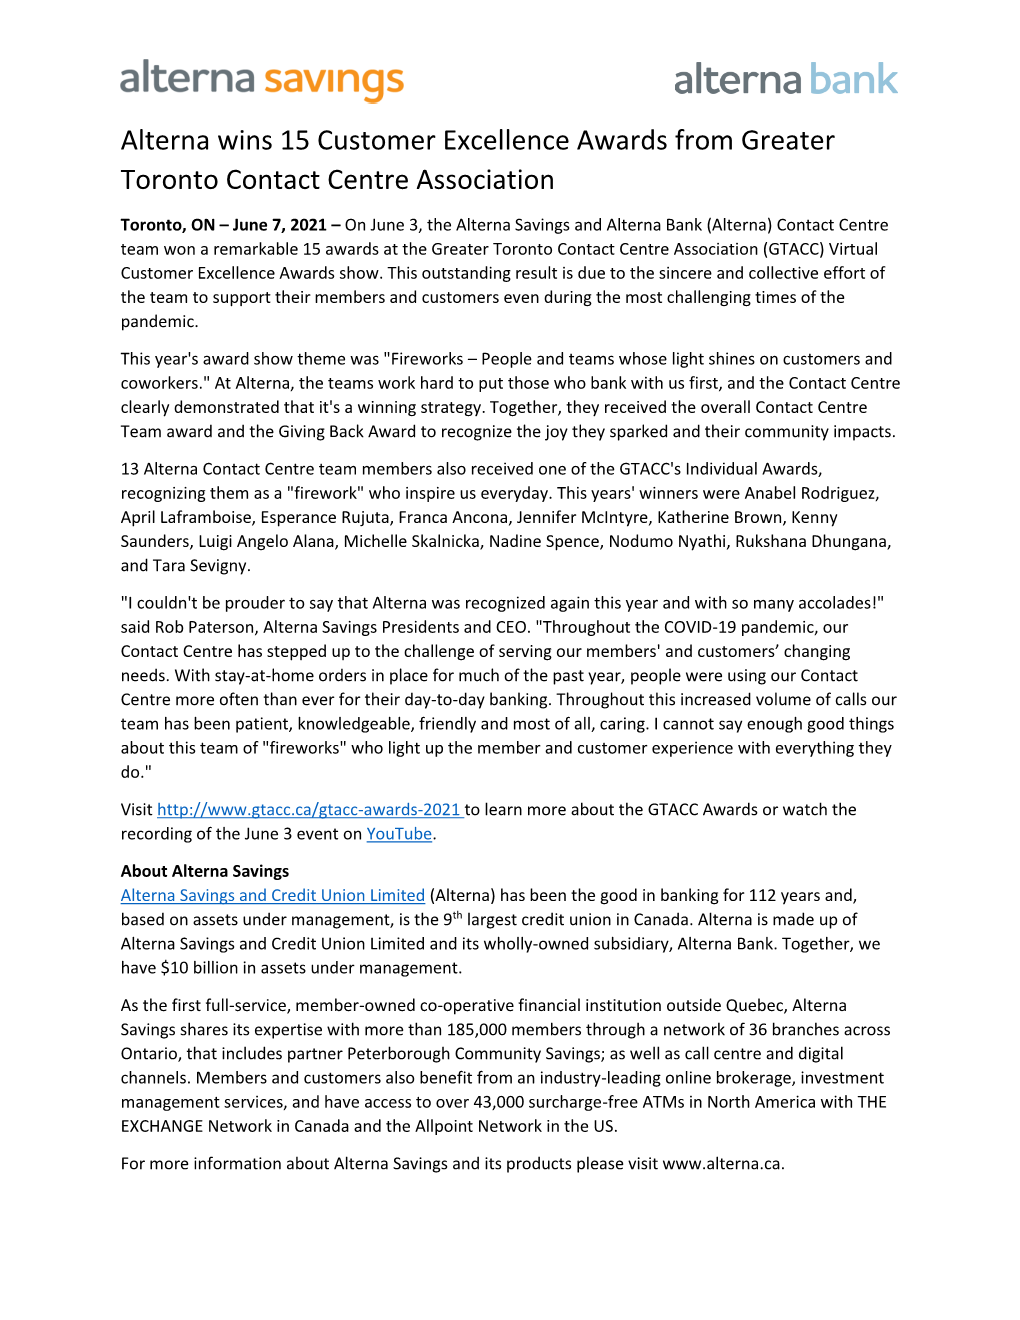 Alterna Wins 15 Customer Excellence Awards from Greater Toronto Contact Centre Association